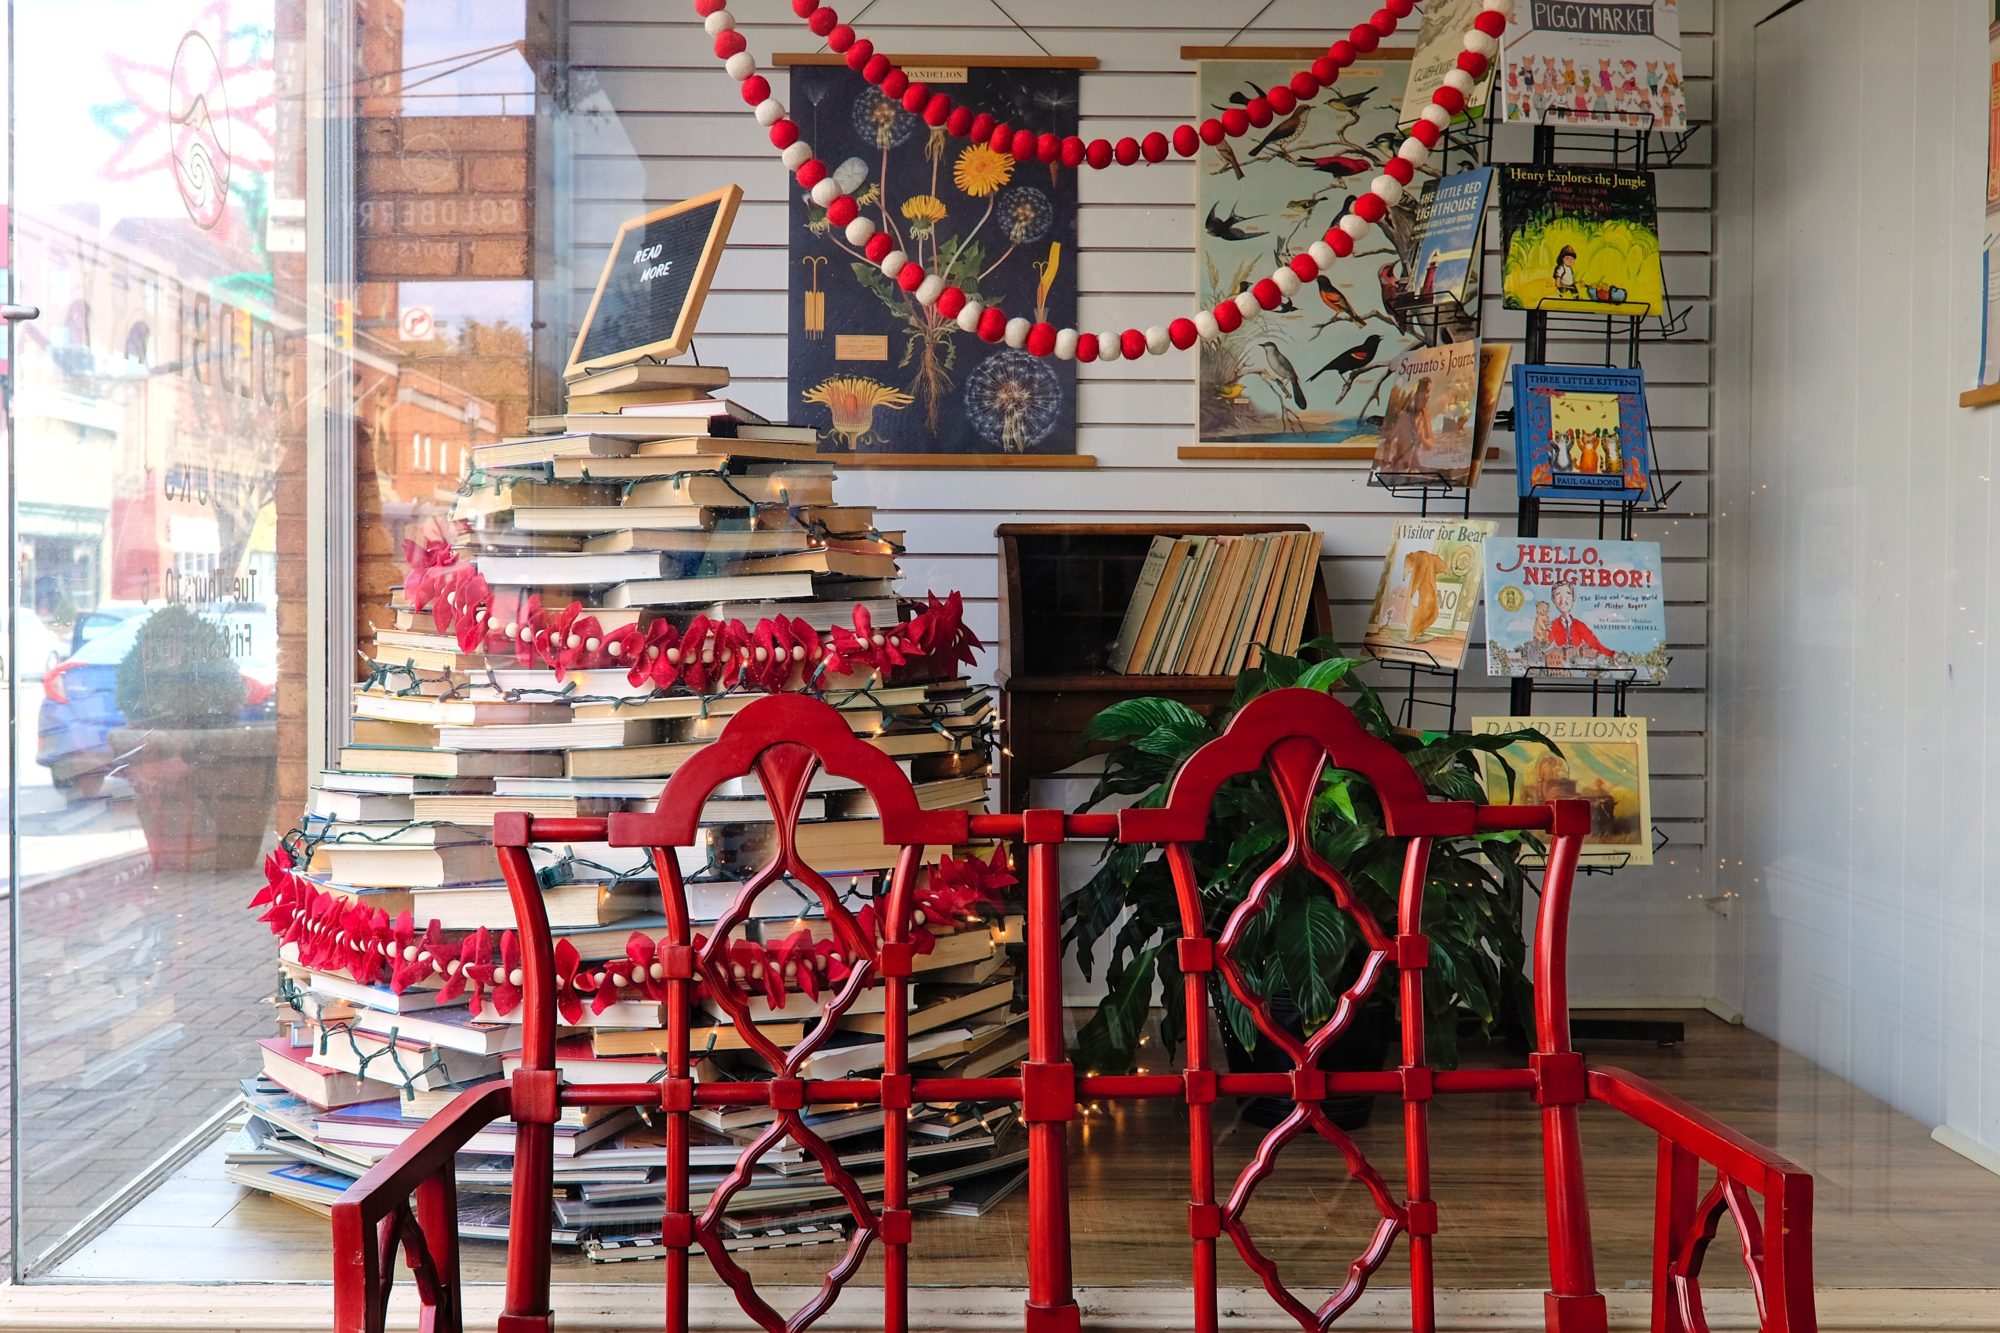 Goldberry Books' window display is a Christmas tree made of books